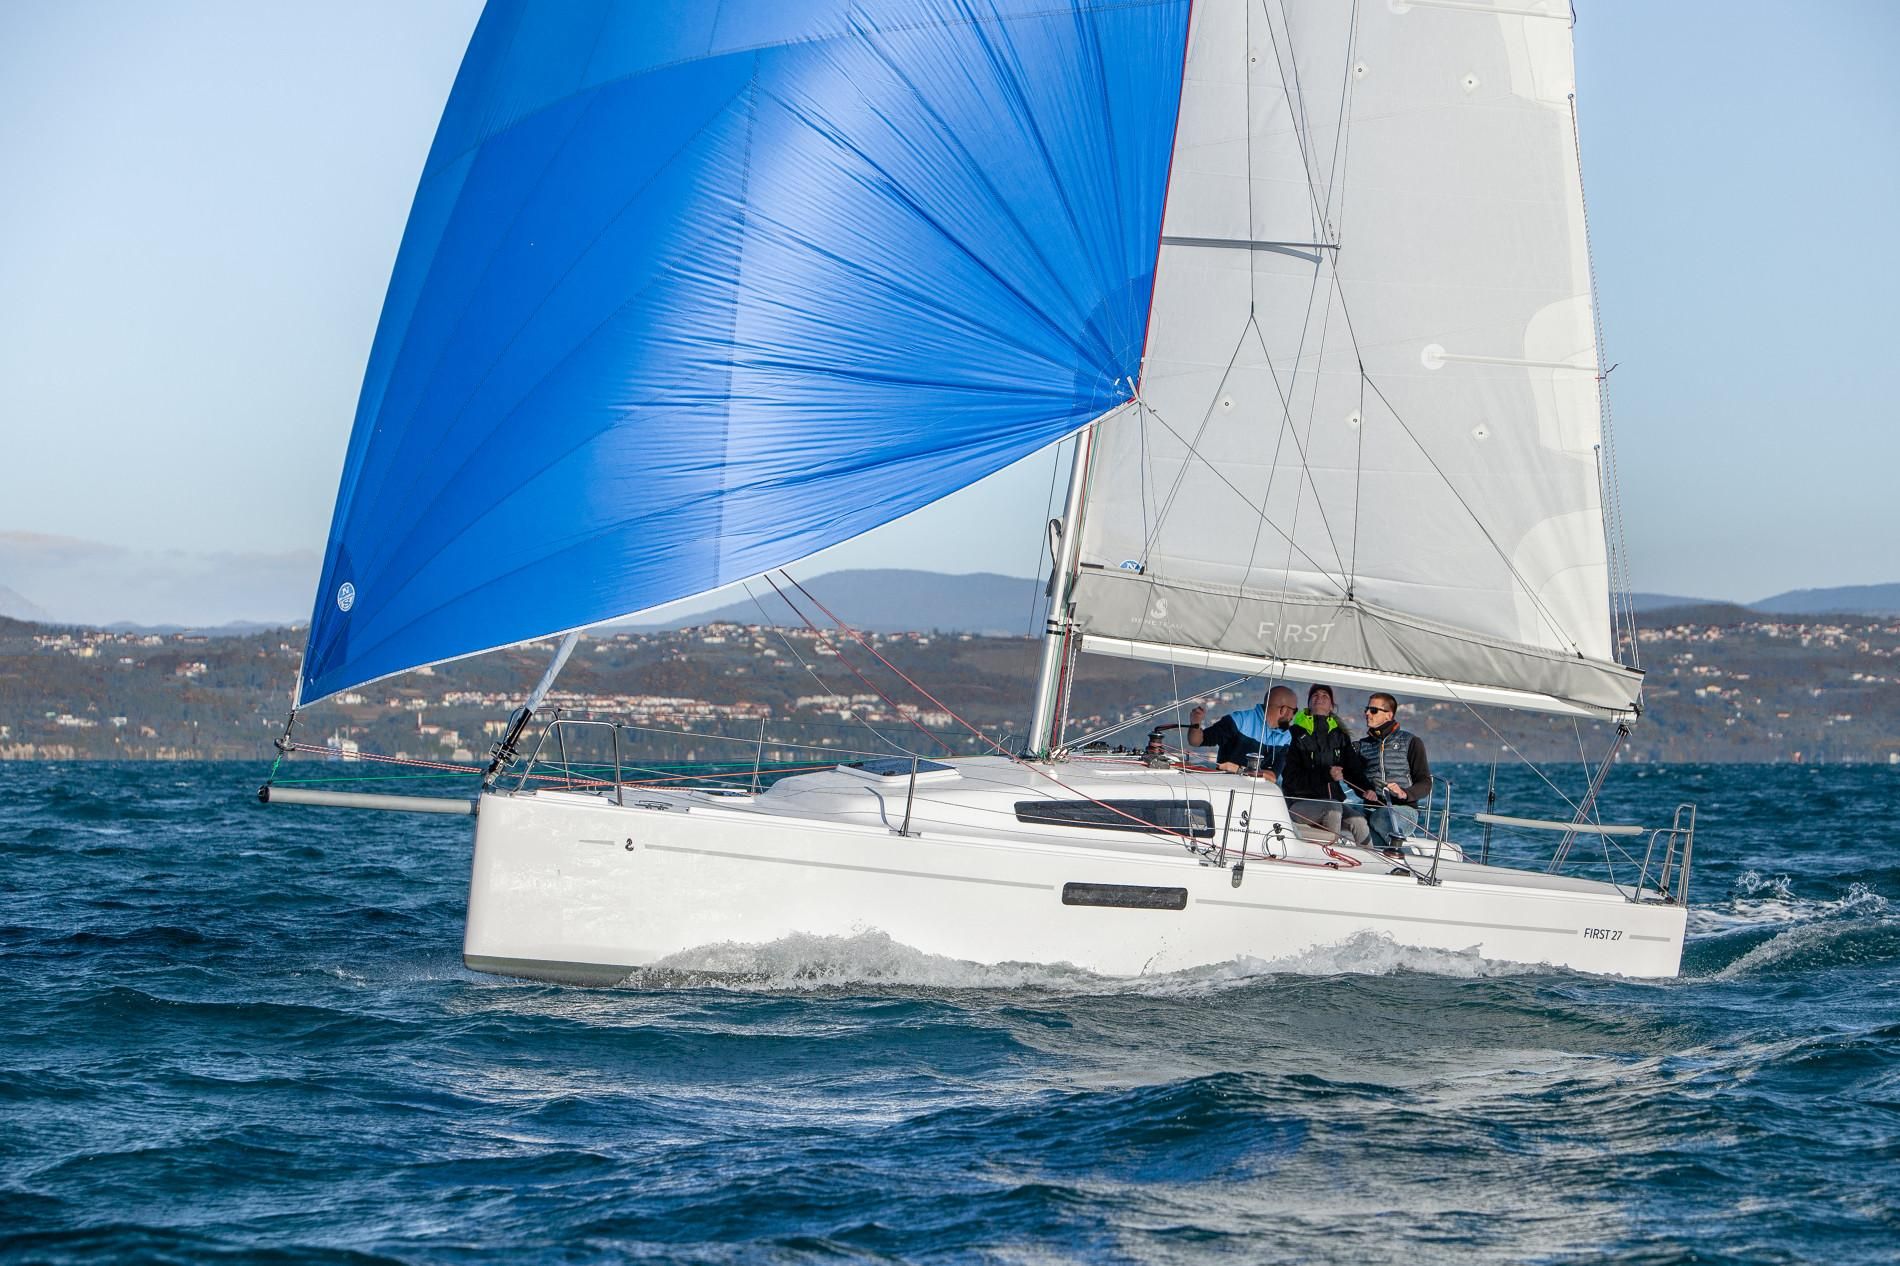 beneteau sailboats for sale in ontario